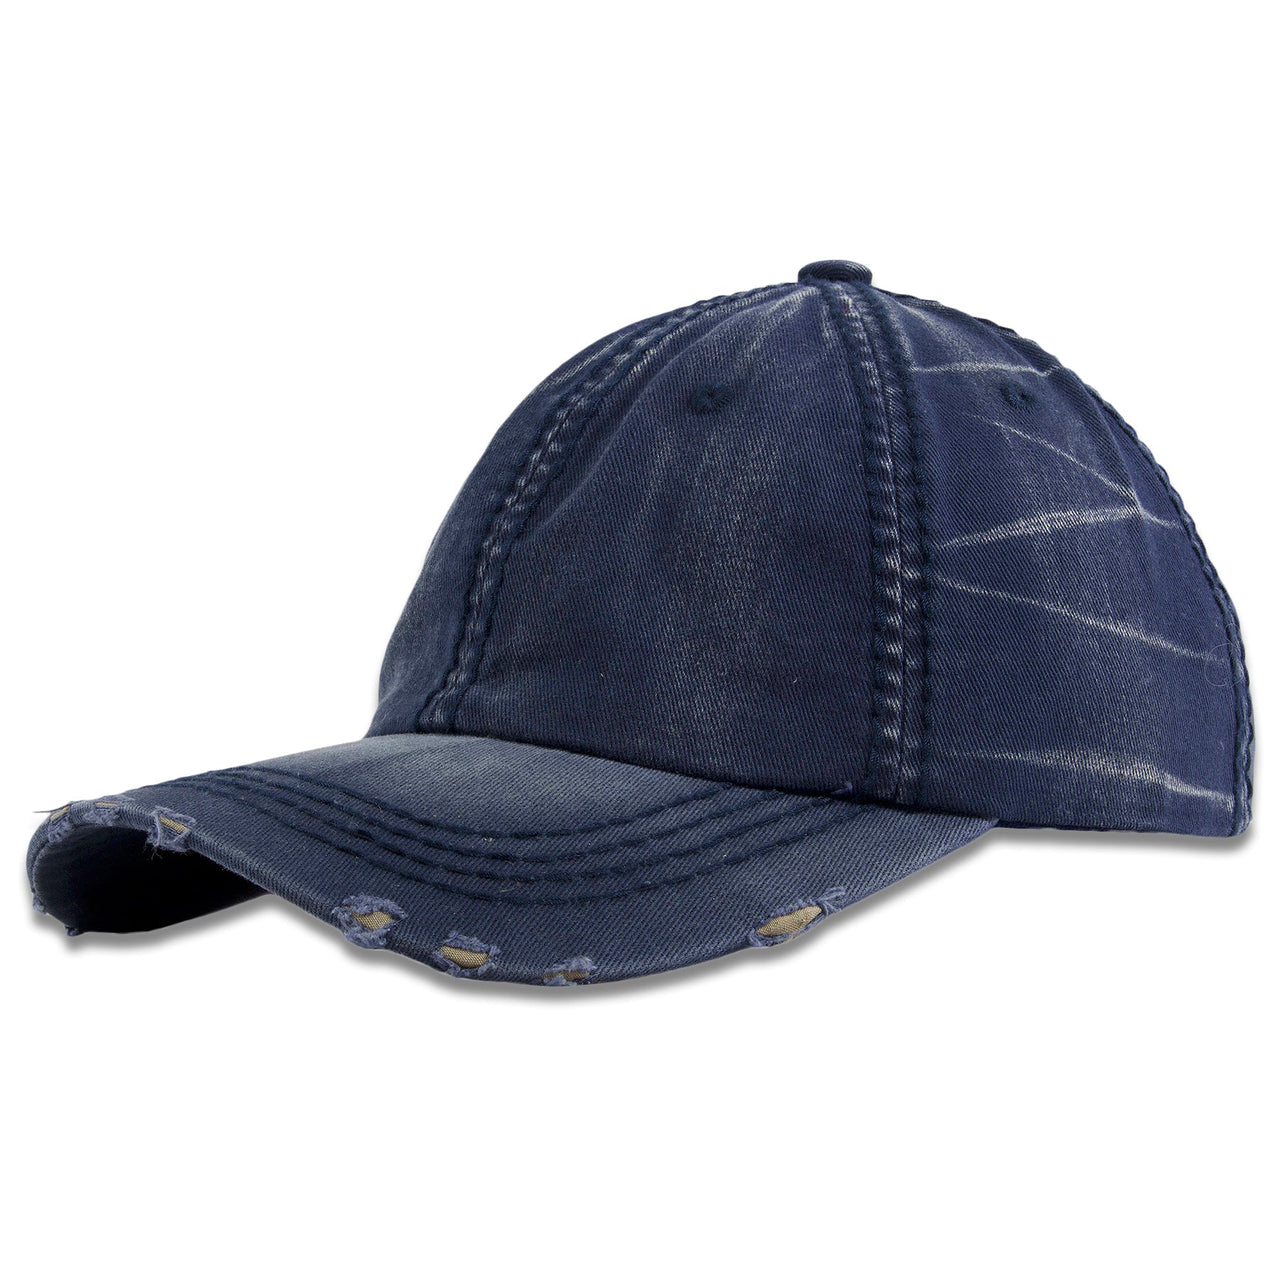 Navy Washed Pigment Distressed Dad Hat